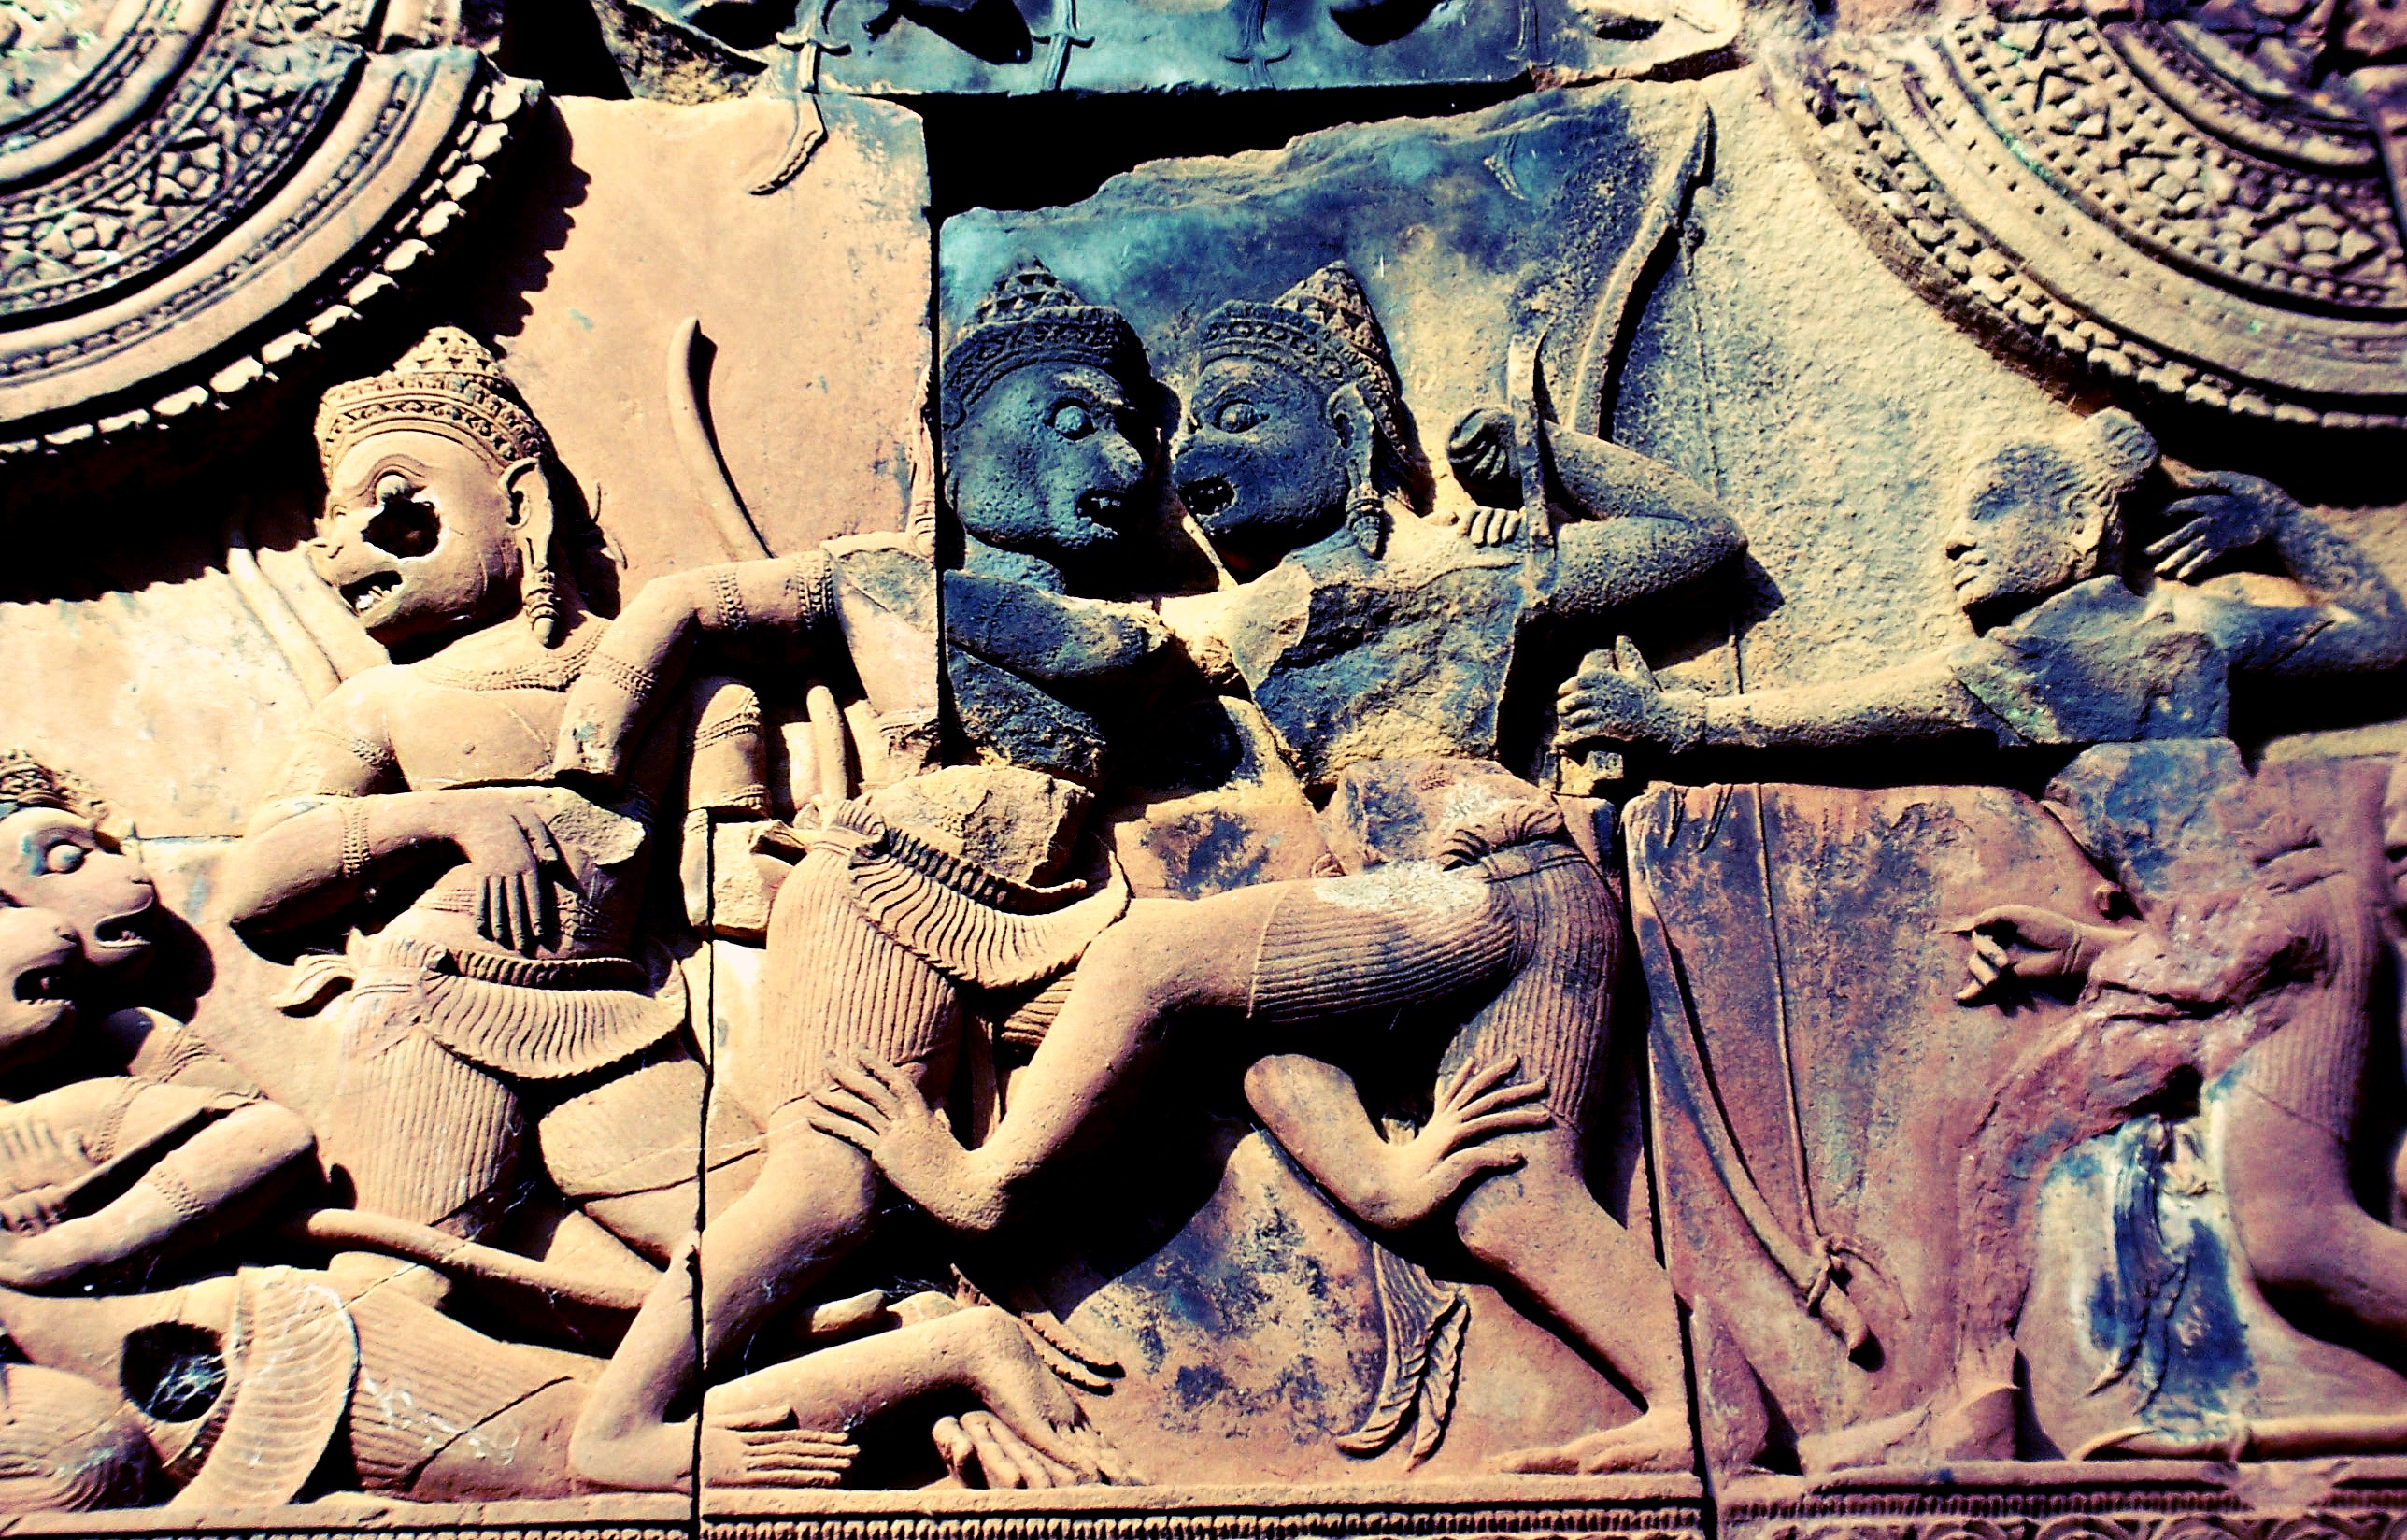 Stone_bas_relief_at_Banteay_Srei_in_Cambodia_from_front